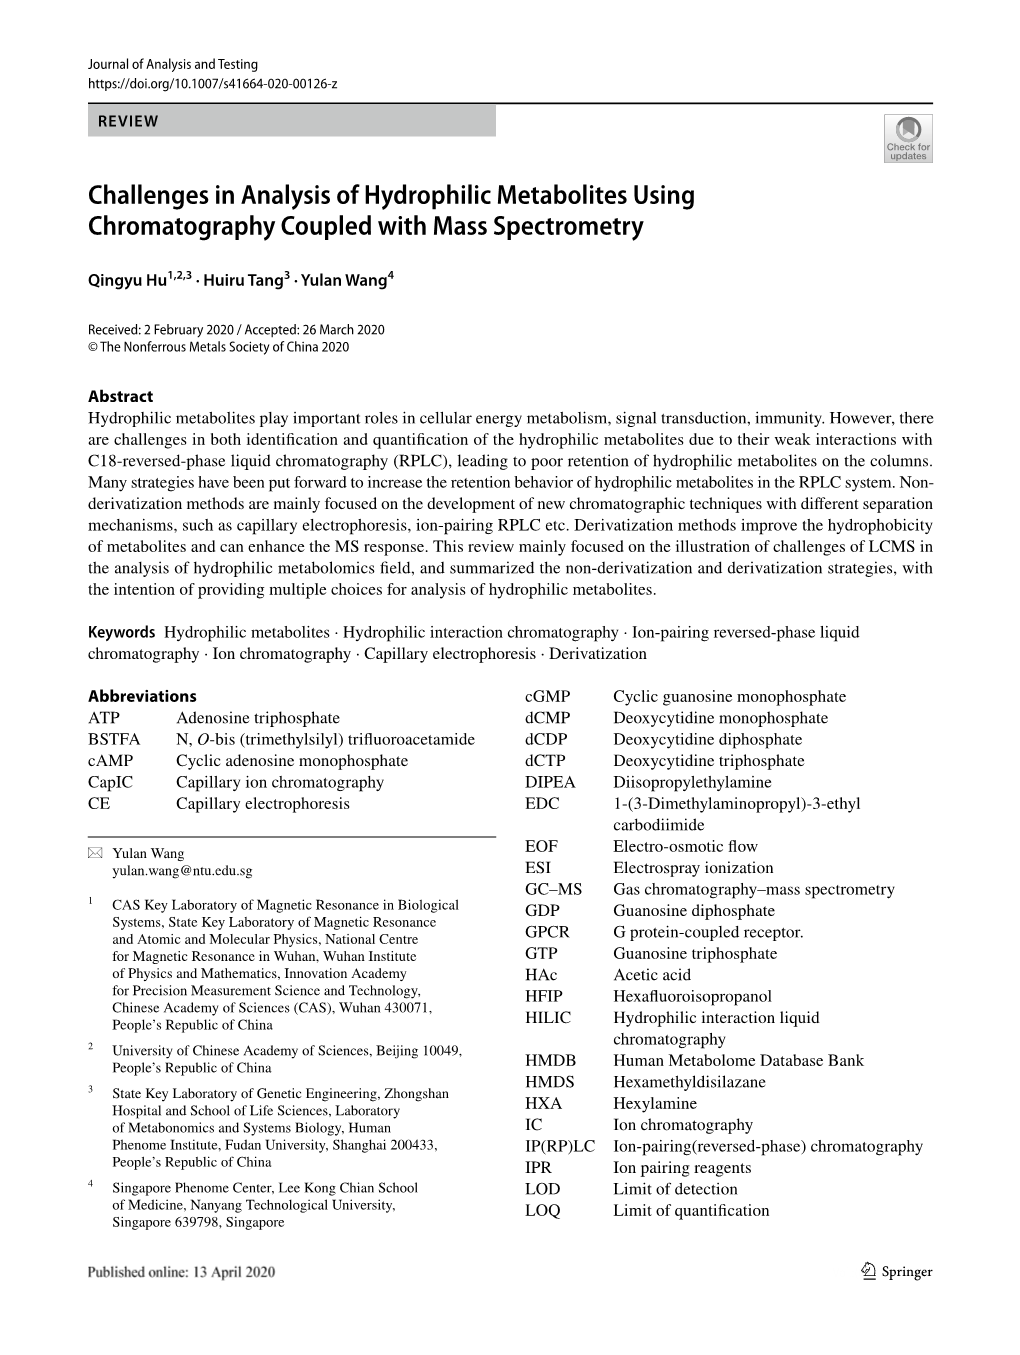 Challenges in Analysis of Hydrophilic Metabolites Using Chromatography Coupled with Mass Spectrometry